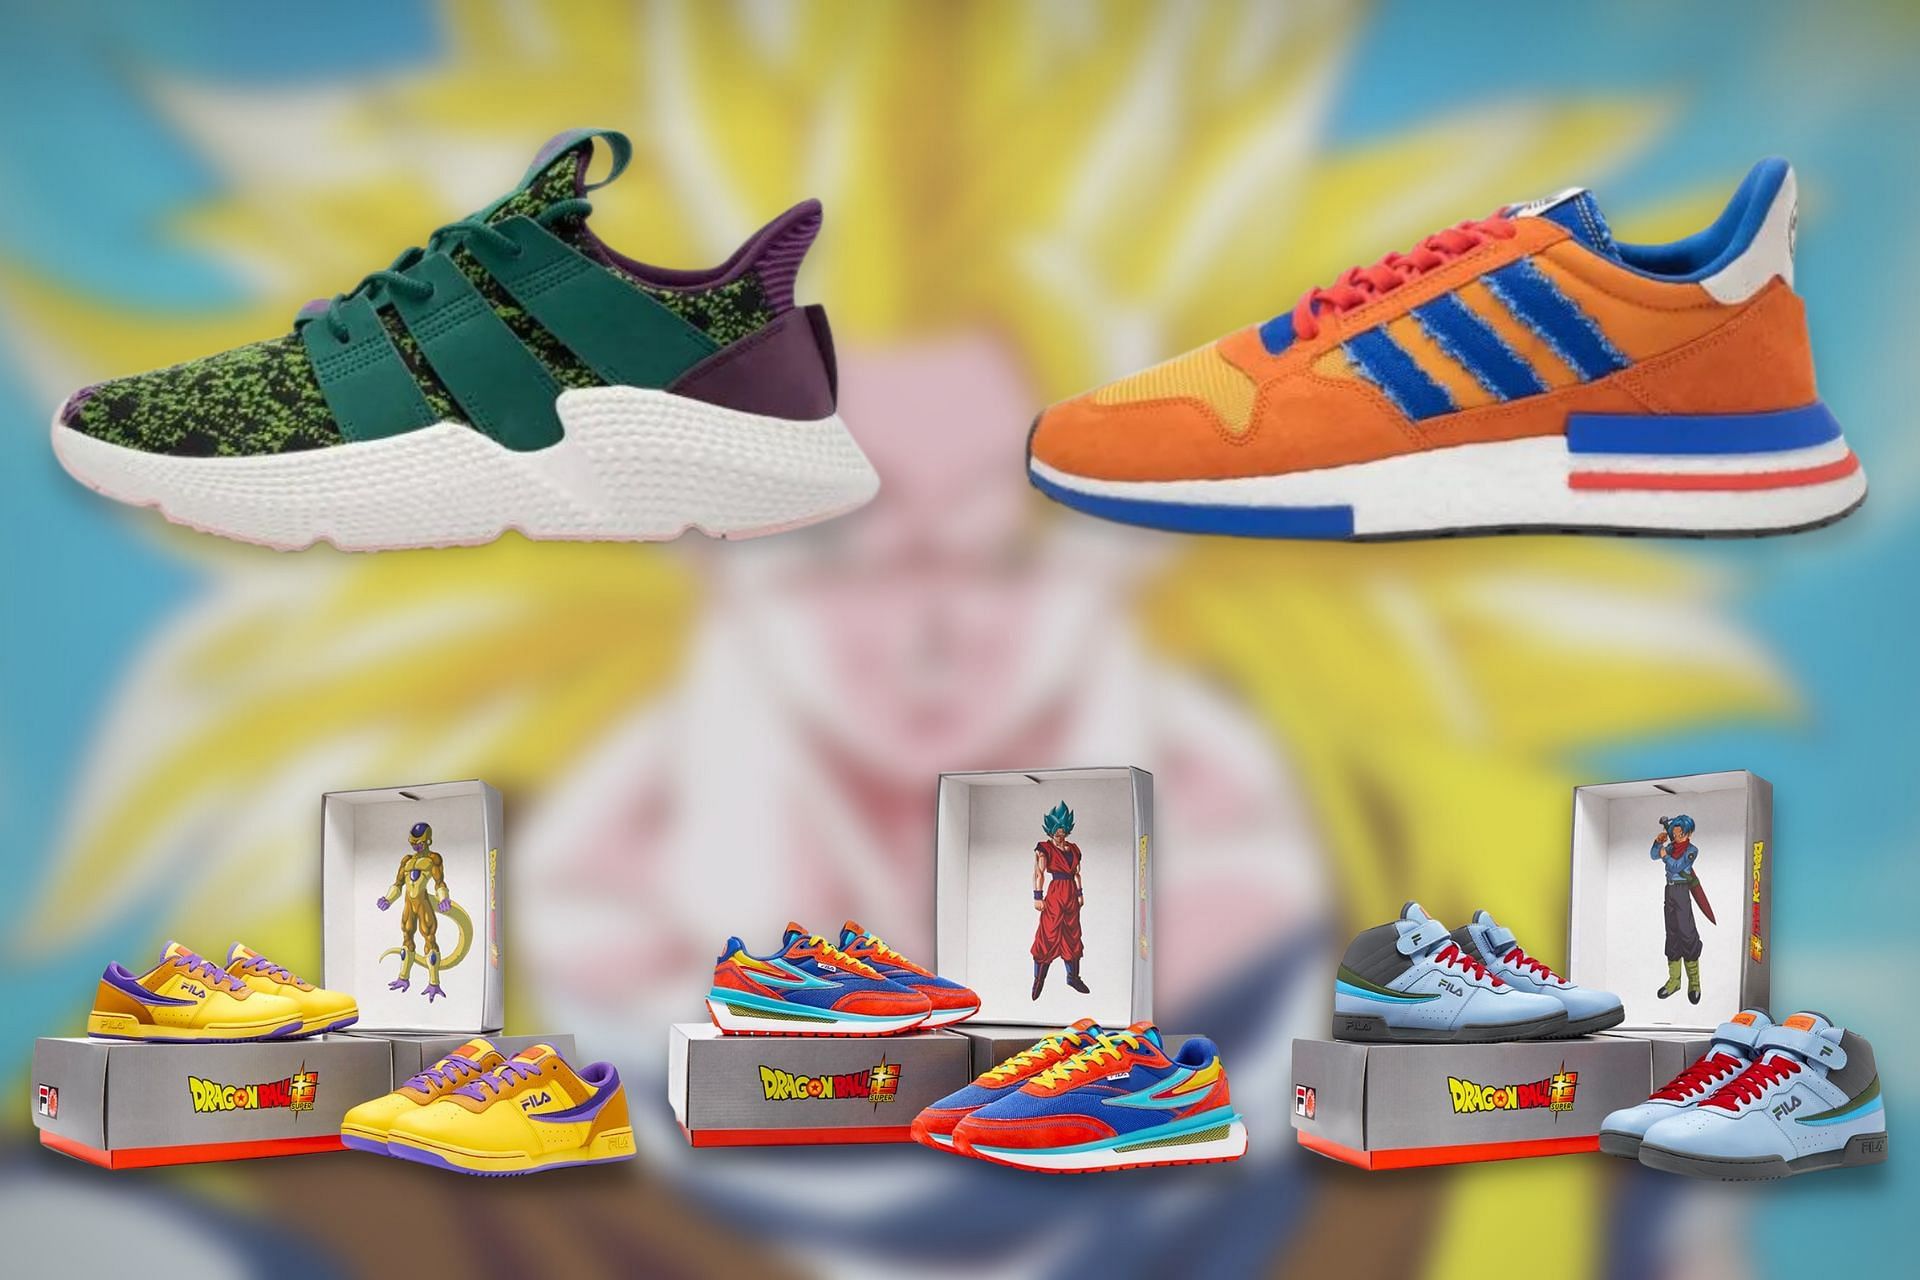 Best Dragon Ball Z sneakers you can look out for (Image via Sportskeeda)